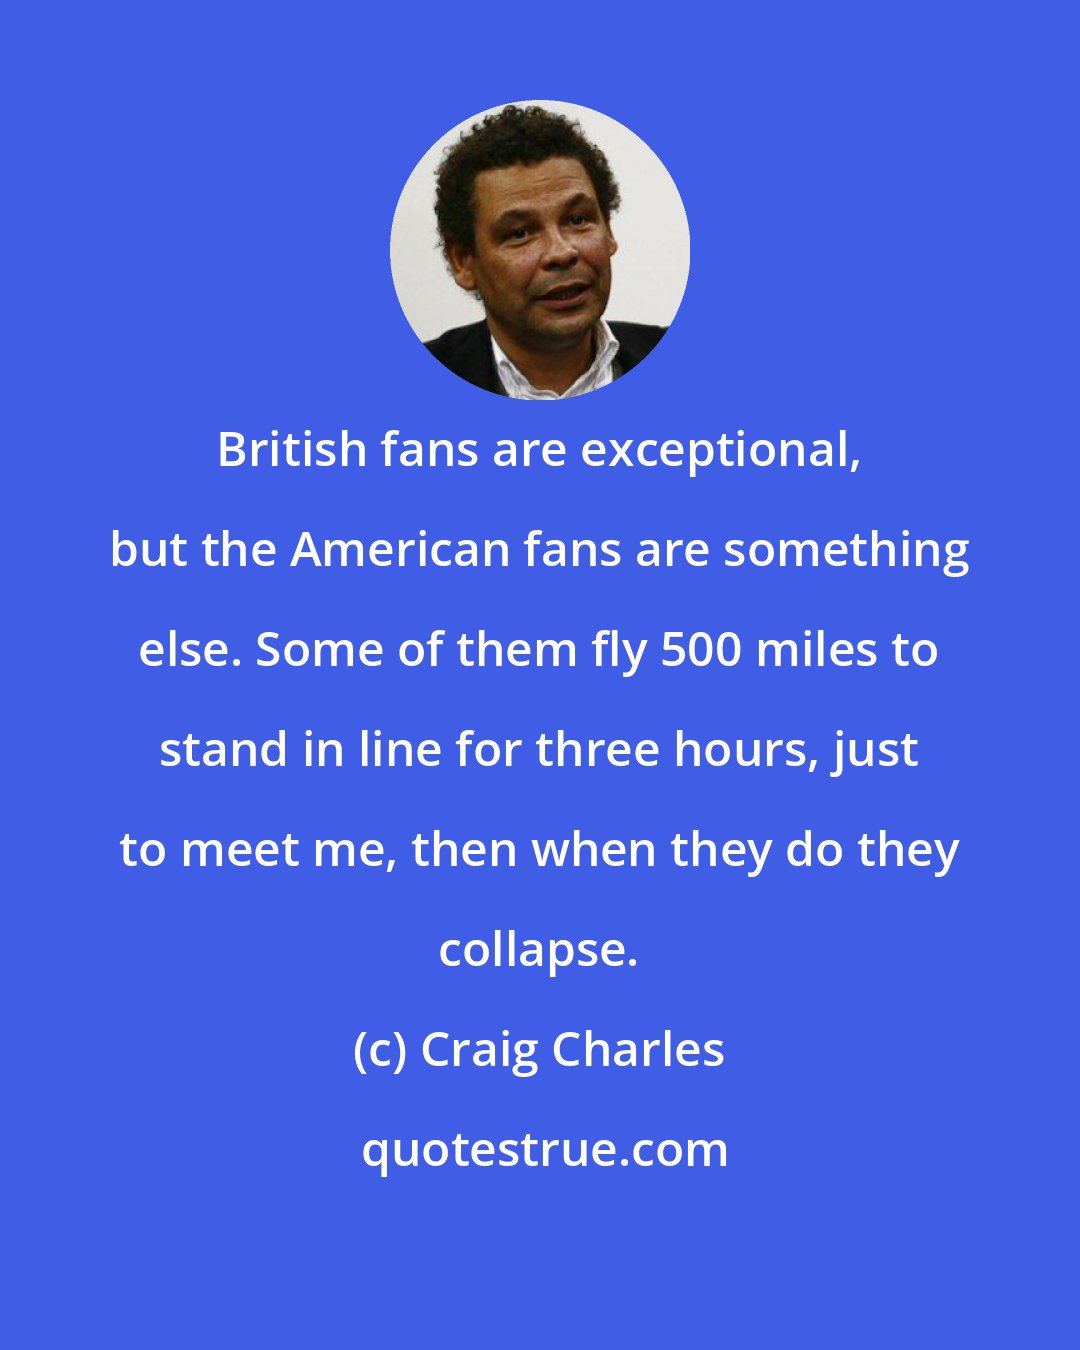 Craig Charles: British fans are exceptional, but the American fans are something else. Some of them fly 500 miles to stand in line for three hours, just to meet me, then when they do they collapse.